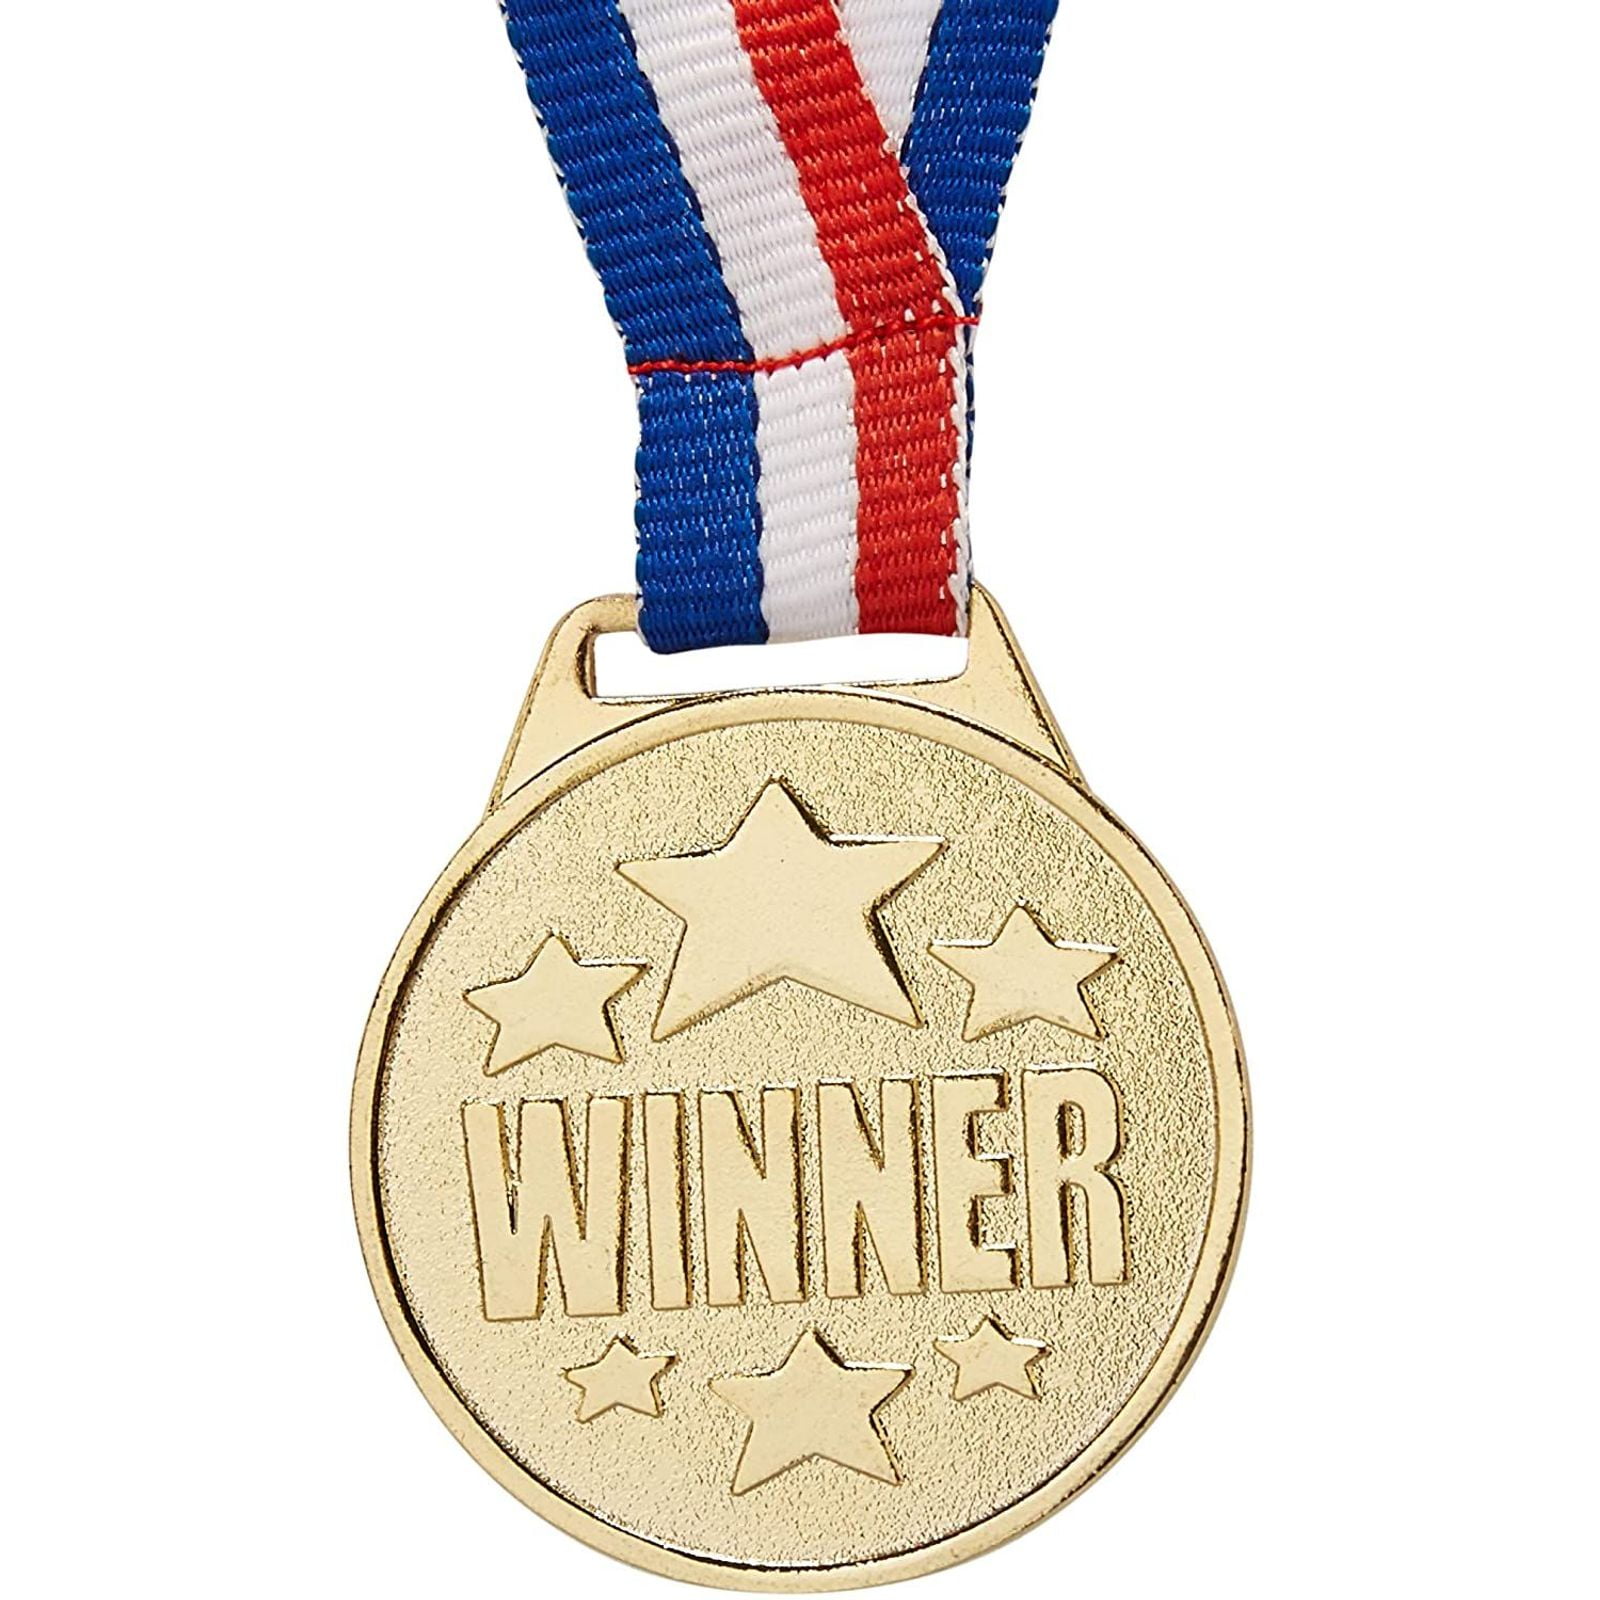 20 x FOOTBALL GOLD METAL MEDALS FREE P&P FREE RIBBONS 